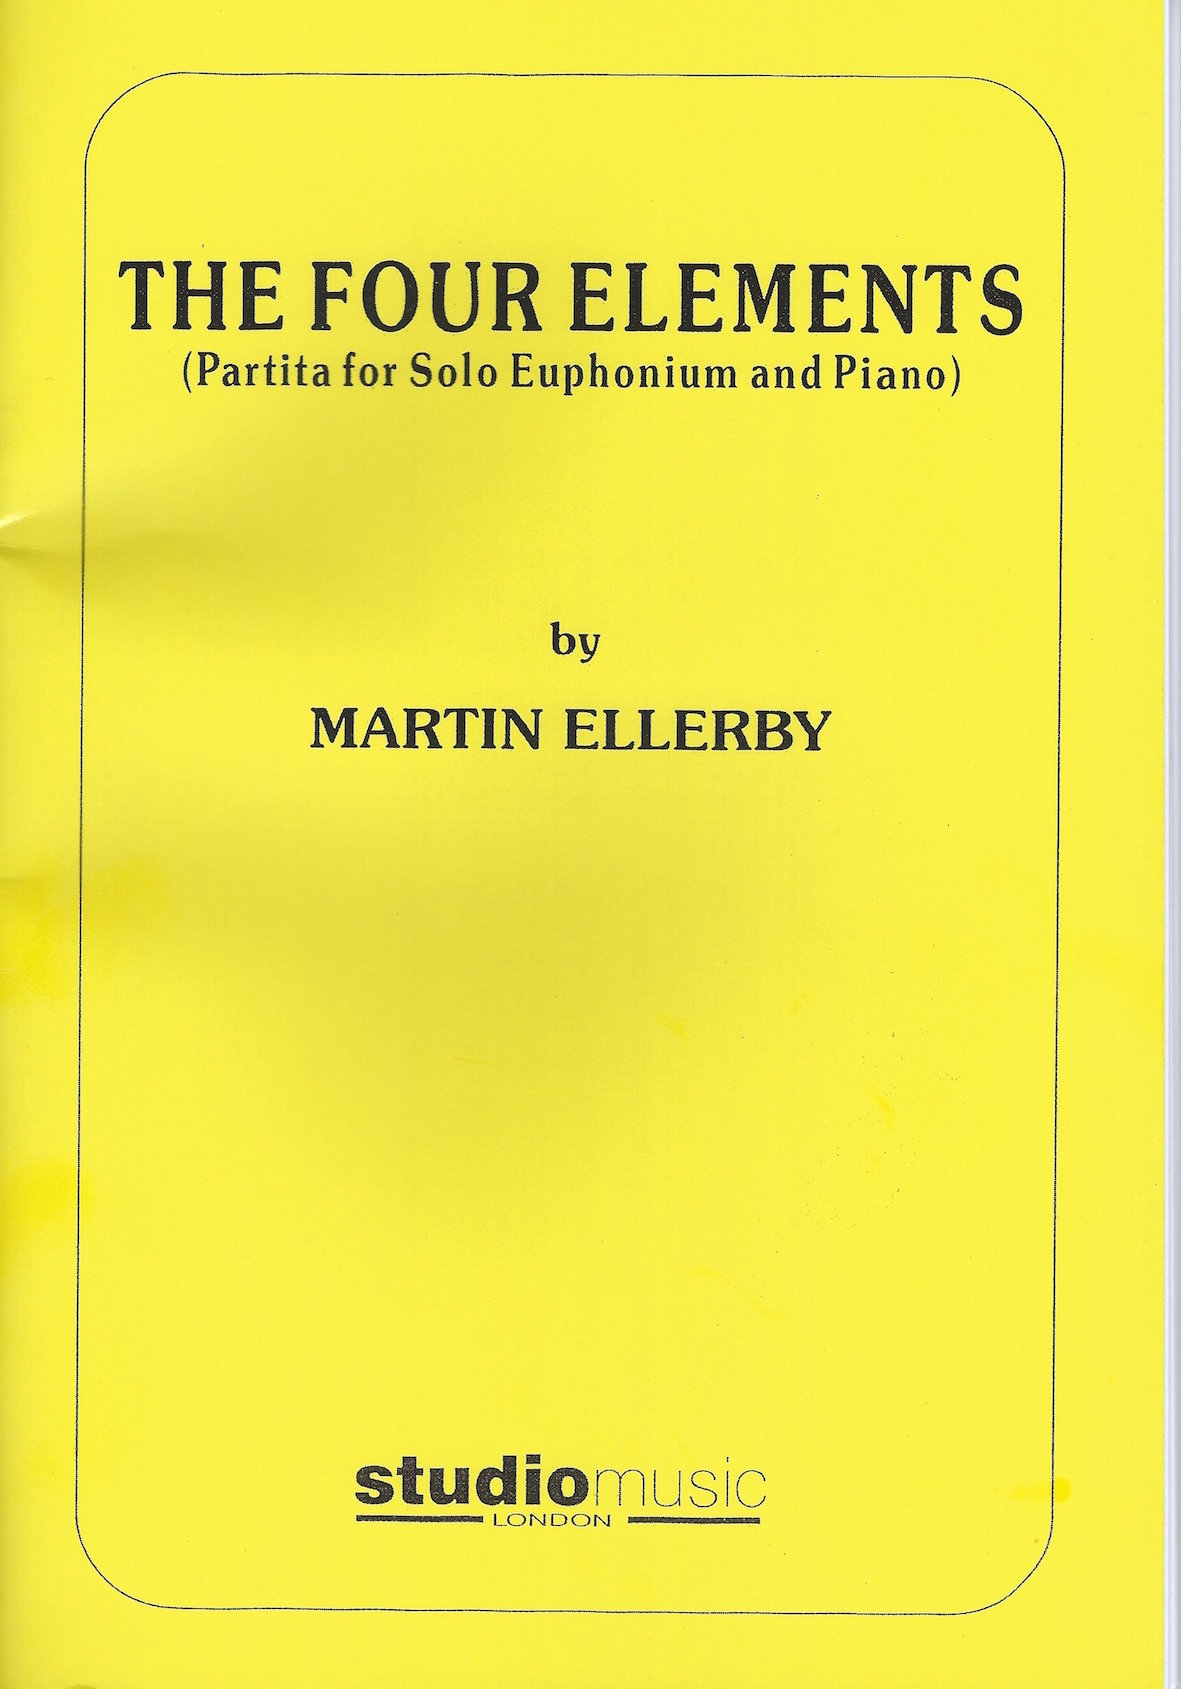 The Four Elements (Partita for Solo Euphonium and Piano) - Martin Ellerby